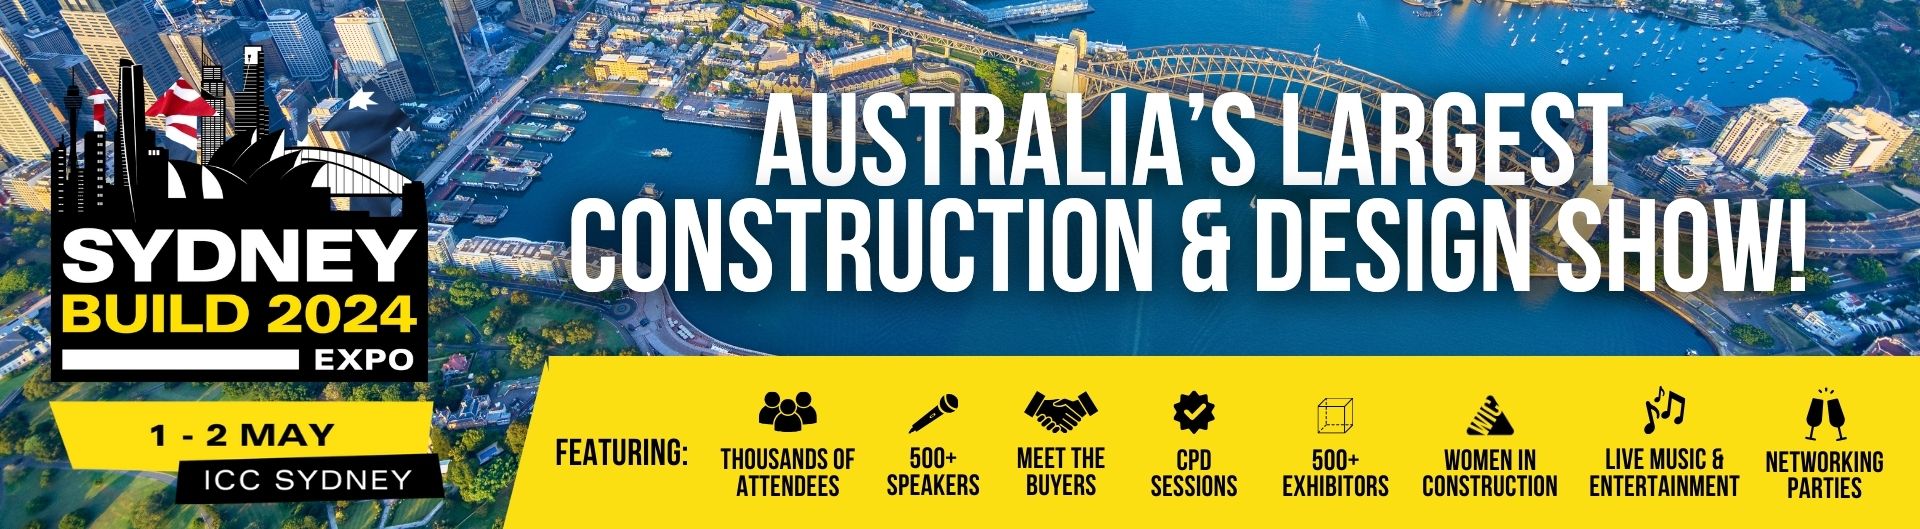 Sydney Build Expo 2024 is coming to ICC Sydney on 1 to 2 May 2024.